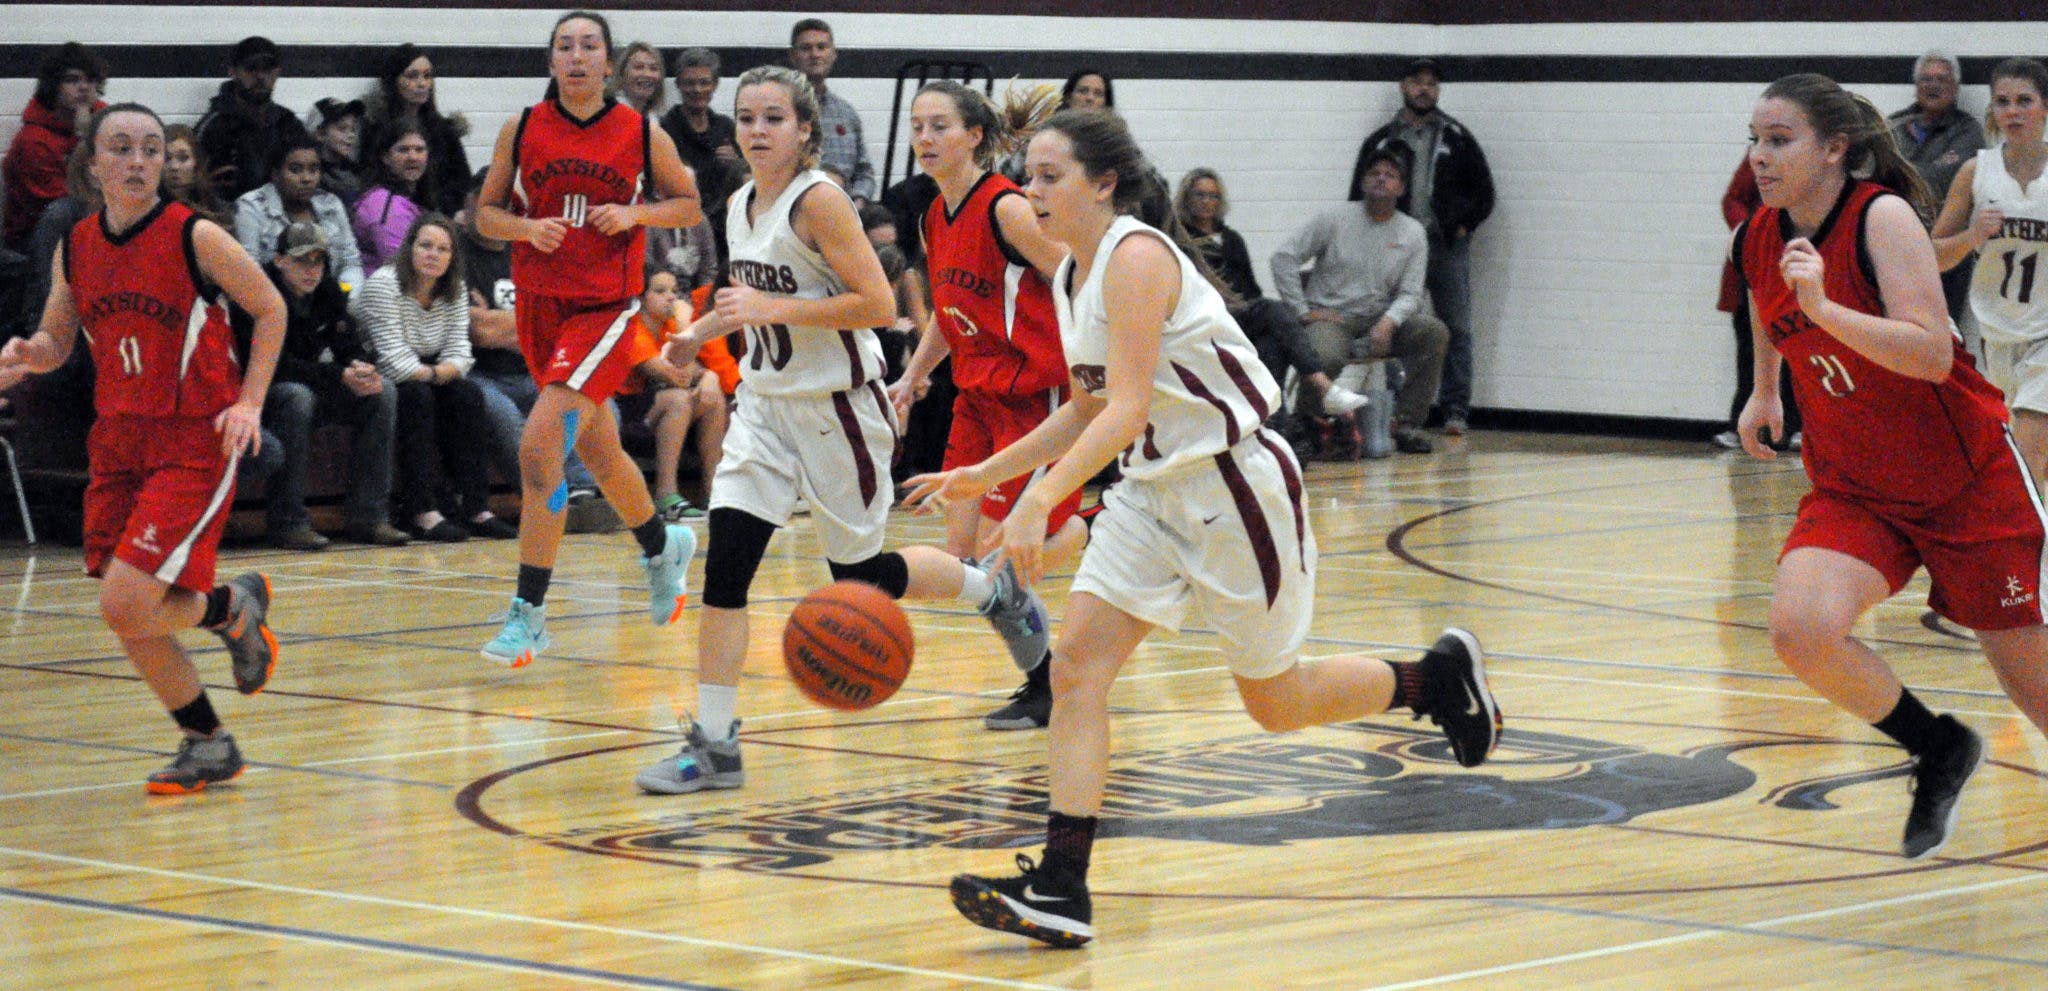 <p>ALWAYS LEADING THE WAY PECI graduate Sydney Davies leads a fast break for the Panthers in this file photo. Davies added to her starry athletic legacy at the local secondary school by winning a share of the 2019-20 Female Senior Athlete of the Year. (Adam Bramburger/Gazette file photo). </p>
